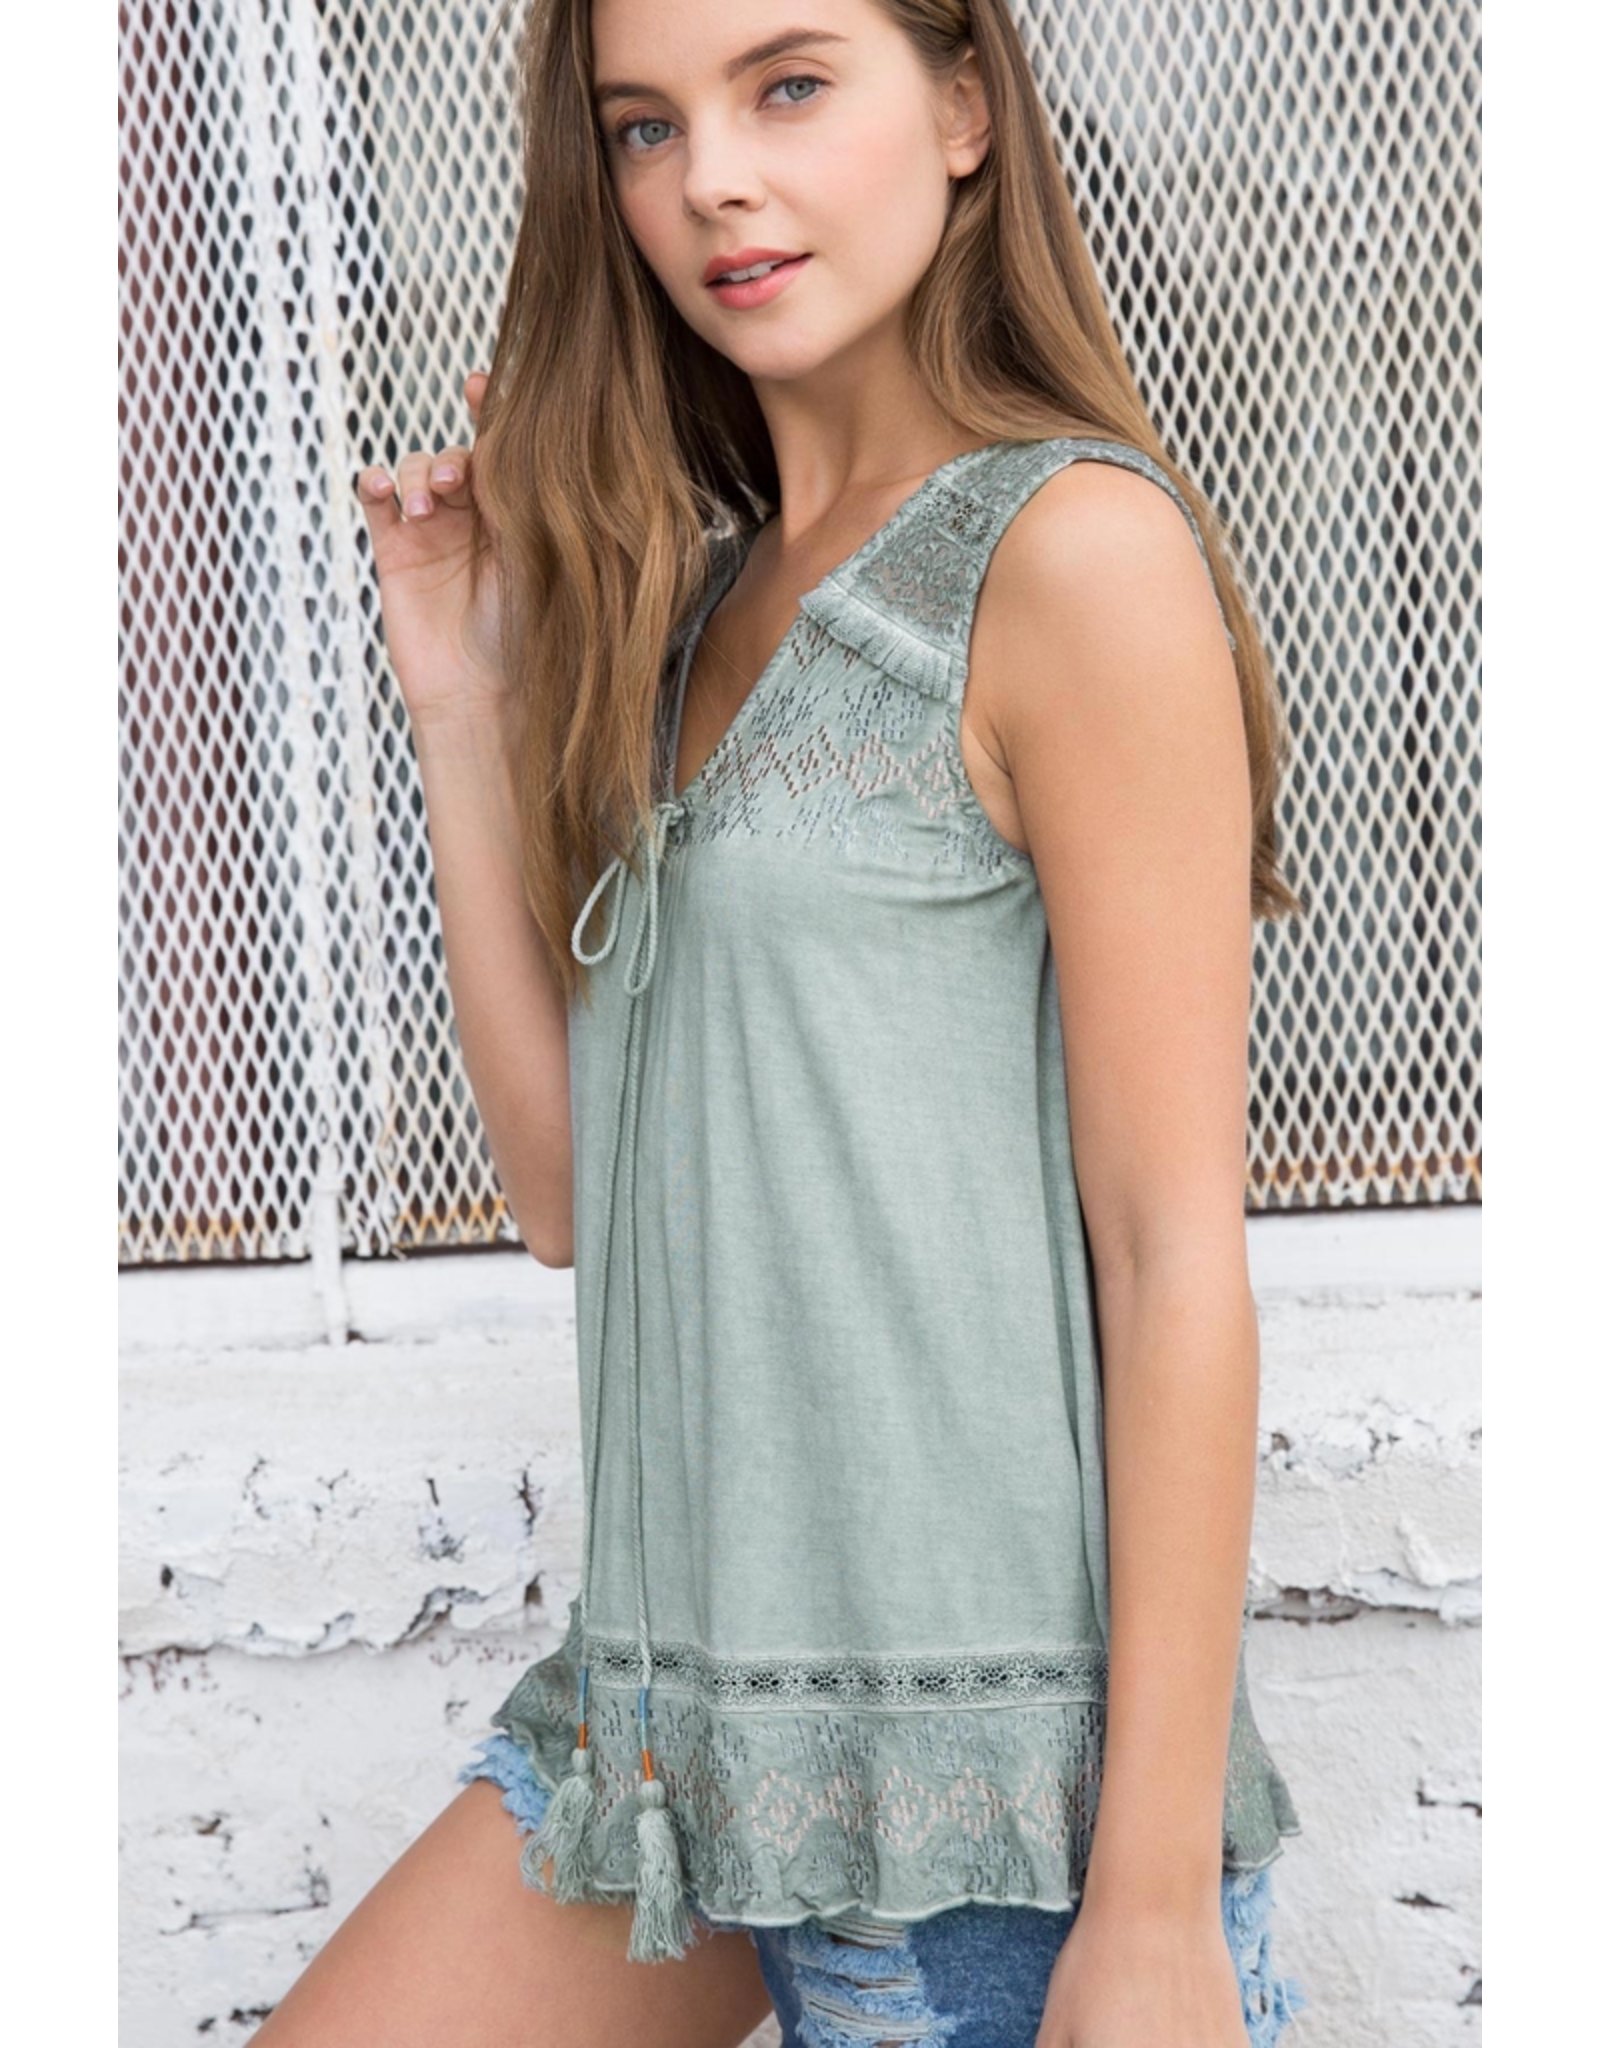 Sleeveless Knit Tank with Lace Trim